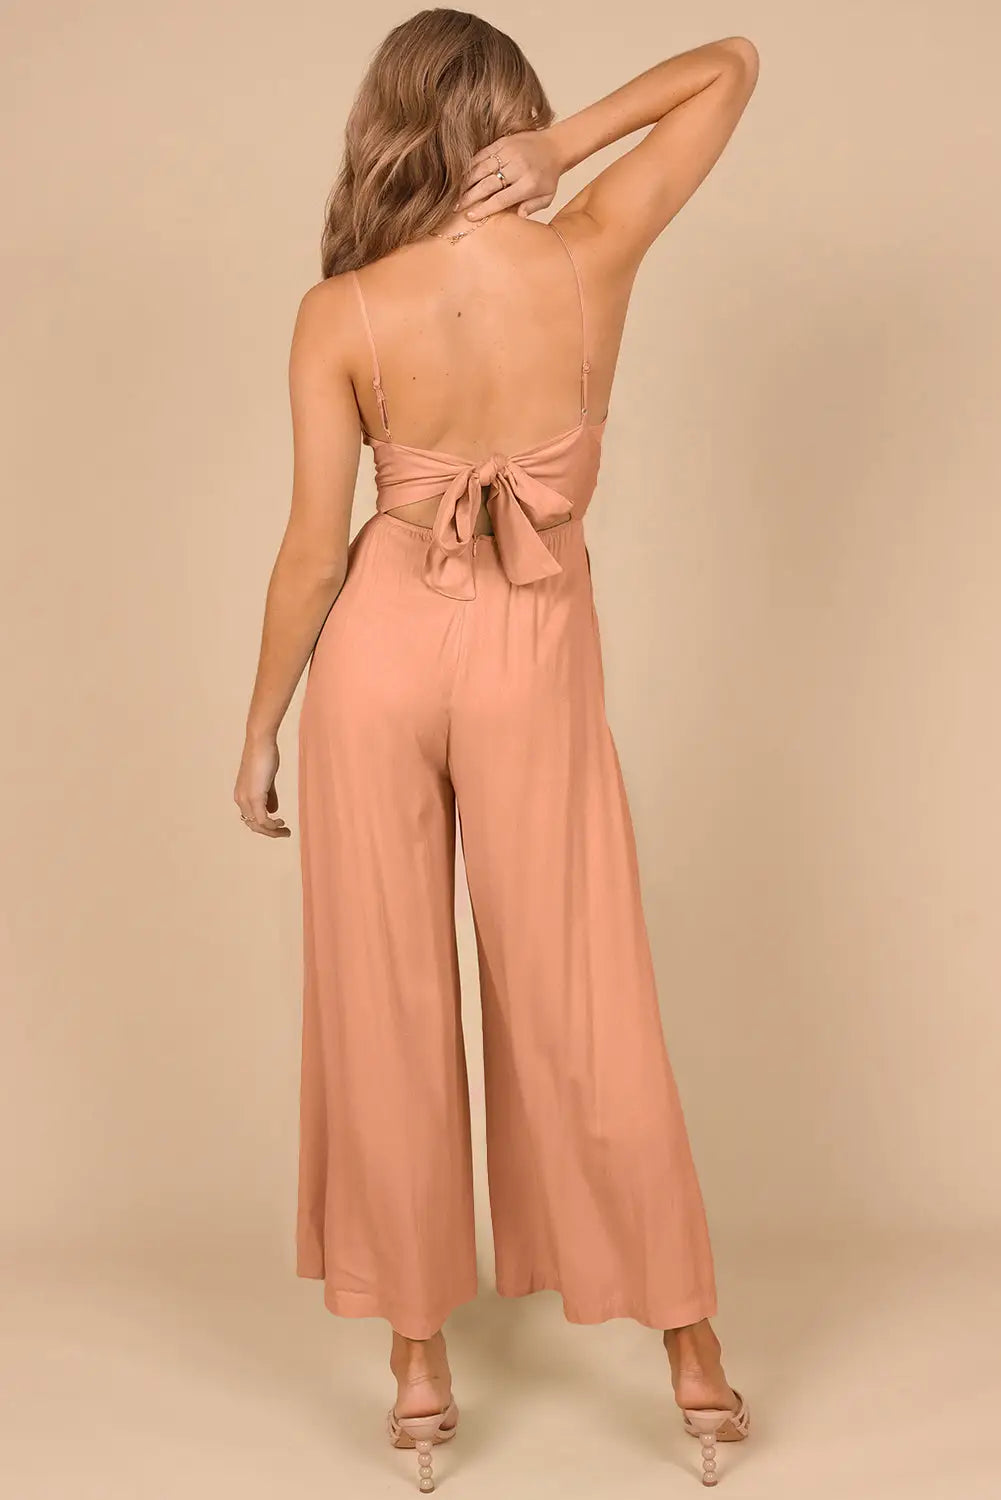 Black spaghetti straps backless knot wide-leg jumpsuit - jumpsuits & rompers